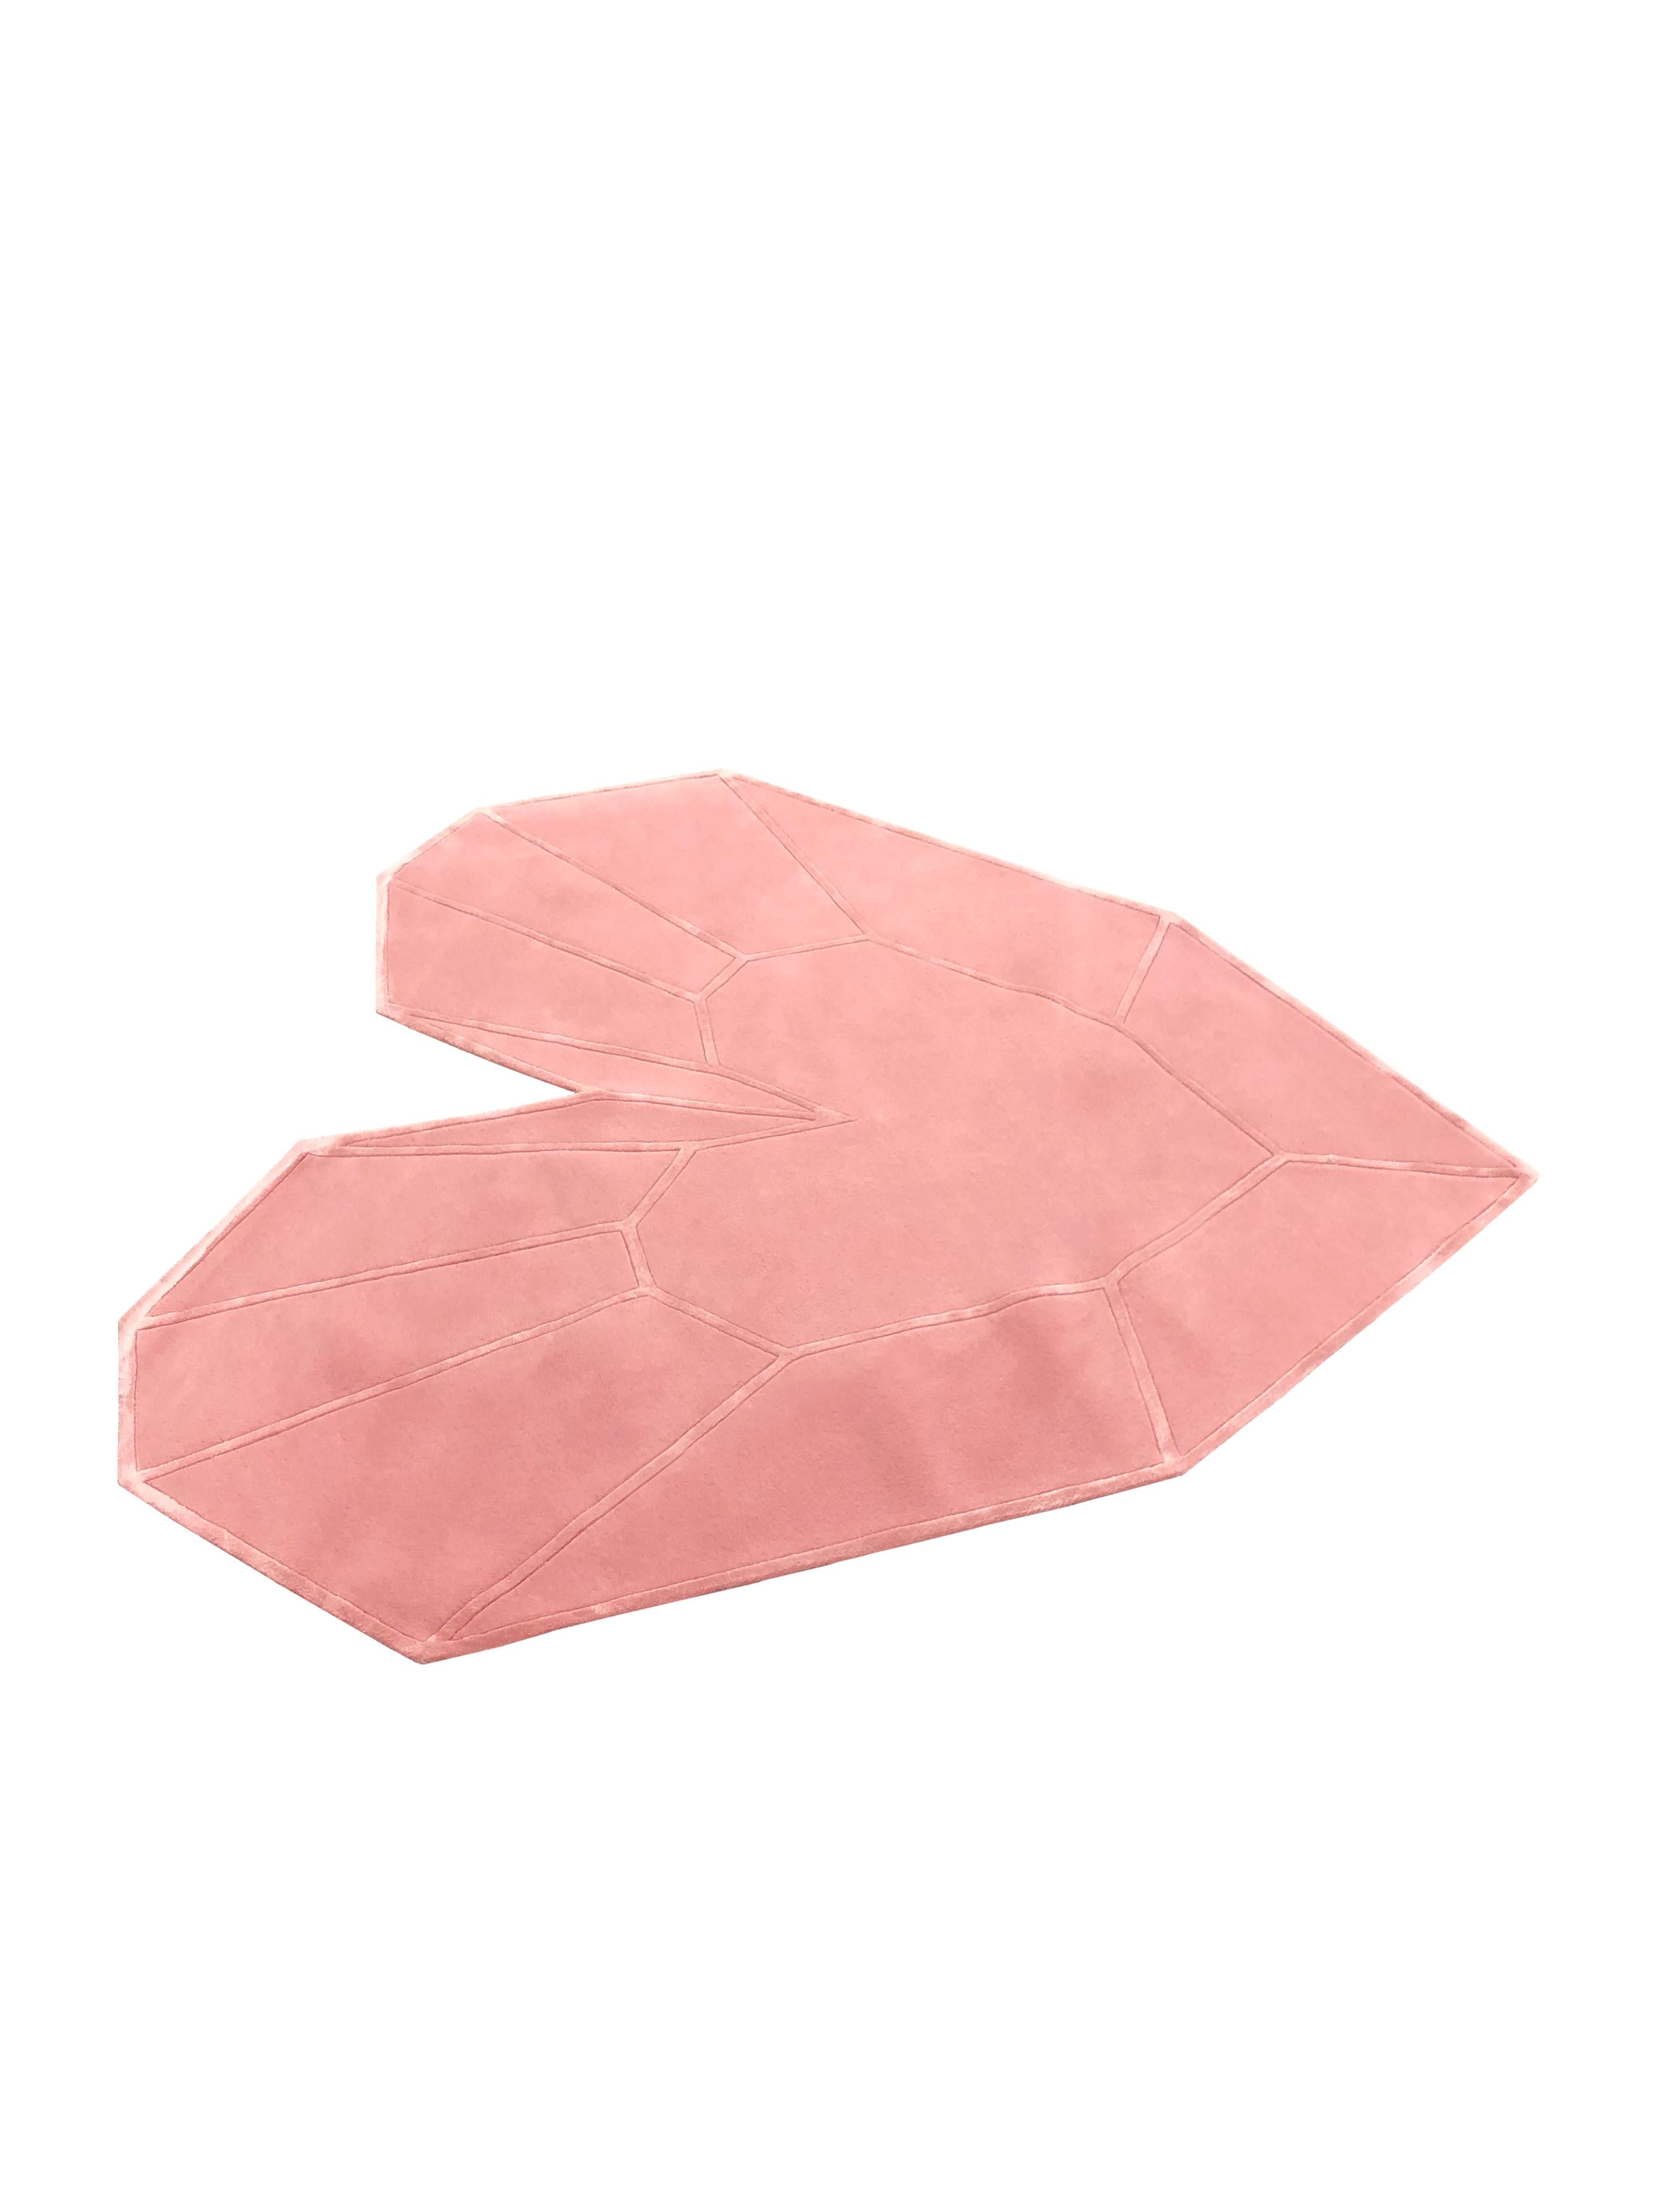 Queen Heart rug by Royal Stranger
Dimensions: 280 x 240 x 2 cm
Materials: Blossom pink wool structure rug drawn and contoured with silk

This royal and romantic rug makes you wander to another dimension. A romantic and luxurious heart rug mixing